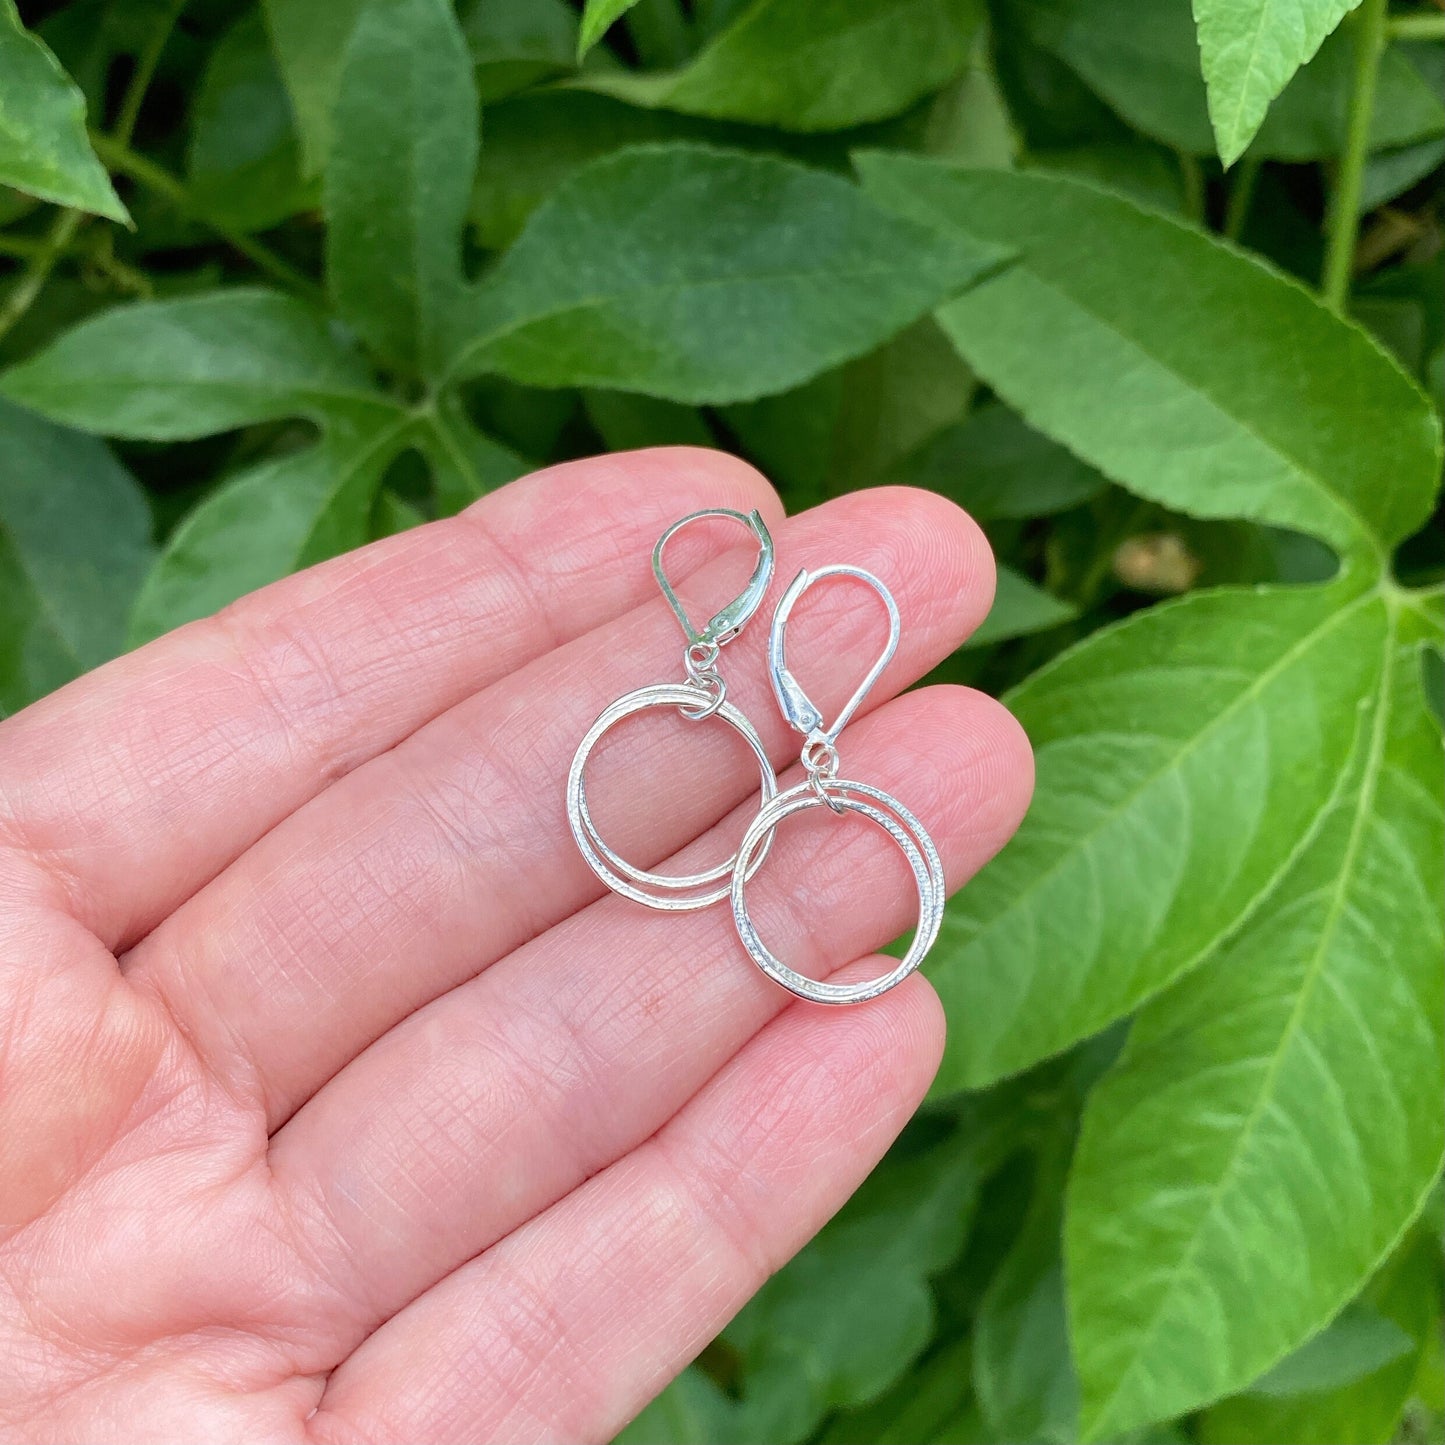 size reference for double hoop earrings